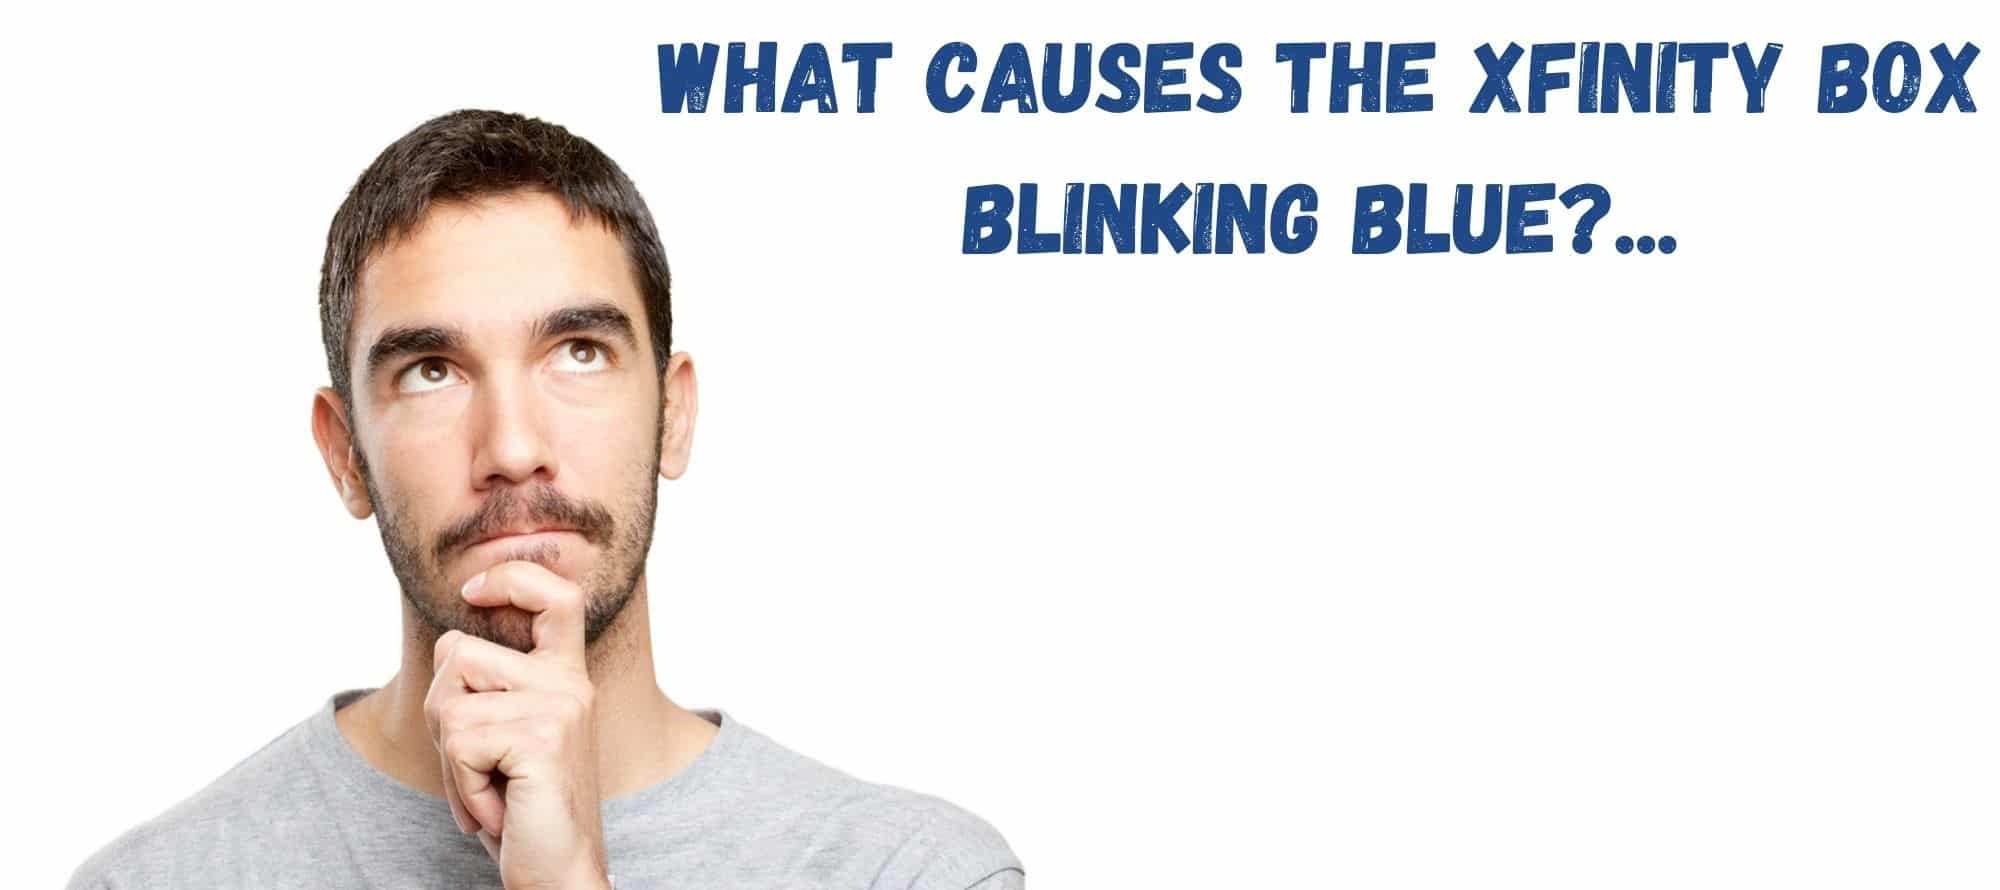 What Causes the Xfinity Box Blinking Blue